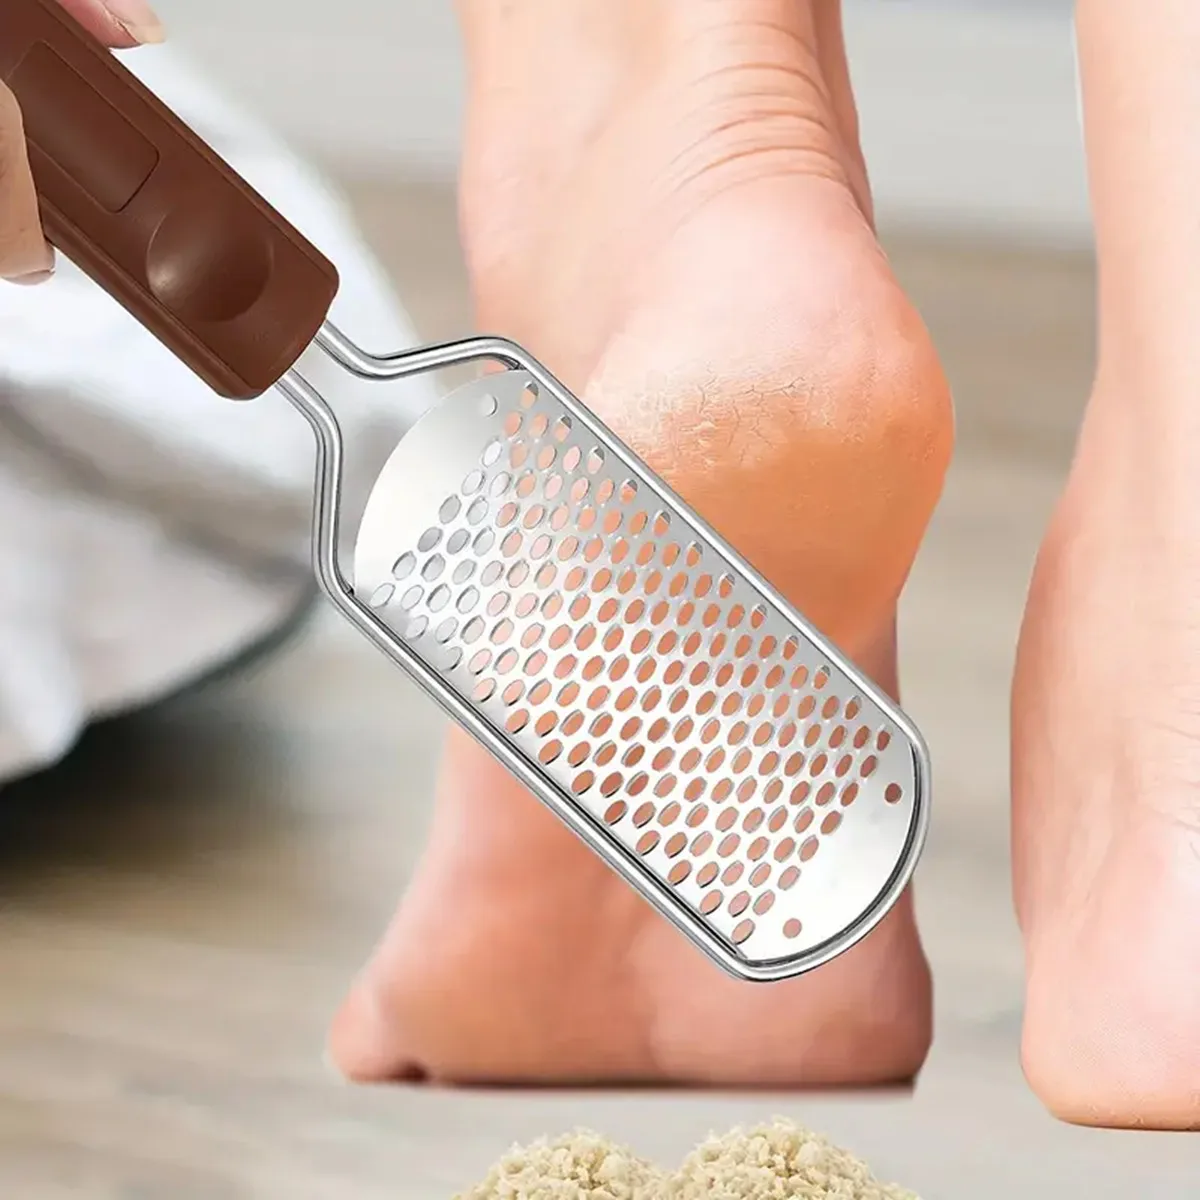 Foot File Foot Scrubber Pedicure - Callus Remover for Feet Professional Foot Grater Rasp Foot Scraper Corns Callous Removers Dry high quality foot file double sided callus remover for dead skin professional pedicure tools callous scraper sander heel filer